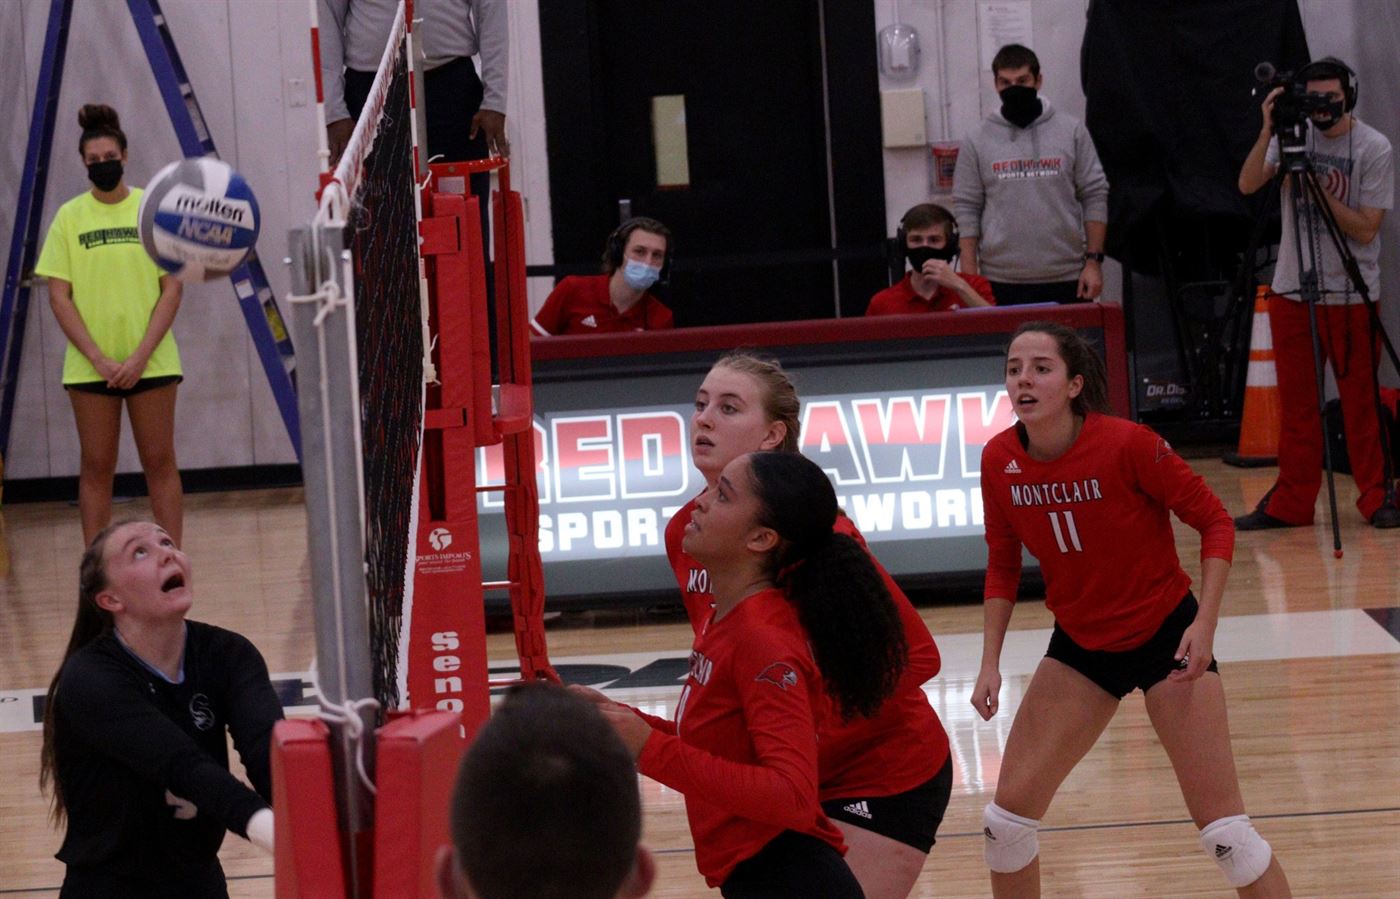 Aubrey Rentzel (left) trying to volley as the Montclair State team watches. John LaRosa | The Montclarion